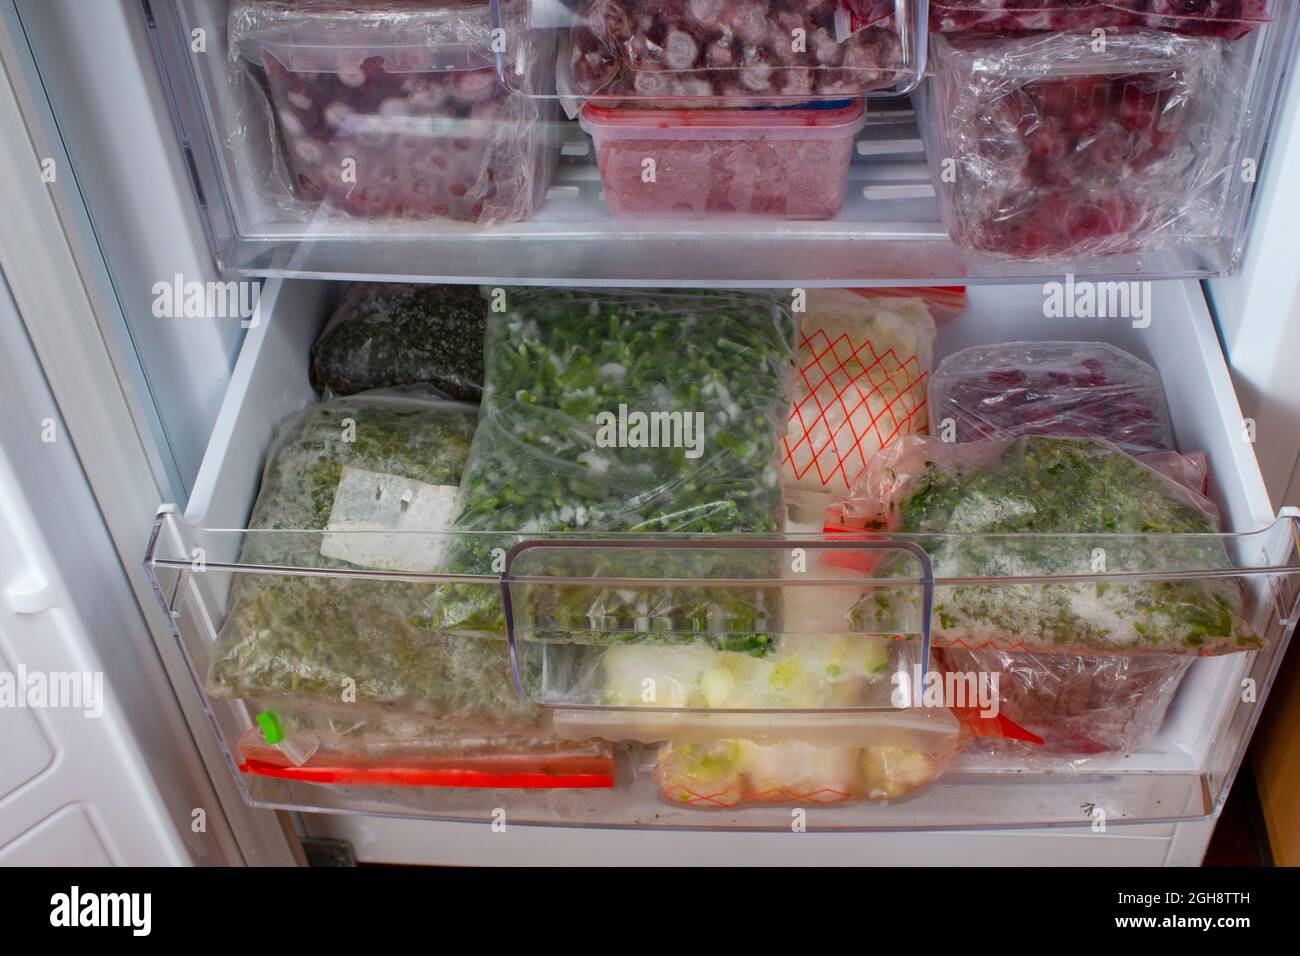 https://c8.alamy.com/comp/2GH8TTH/open-freezer-with-frozen-red-cherries-and-frozen-vegetables-food-storage-frozen-products-stocks-of-products-for-the-quarantine-period-2GH8TTH.jpg